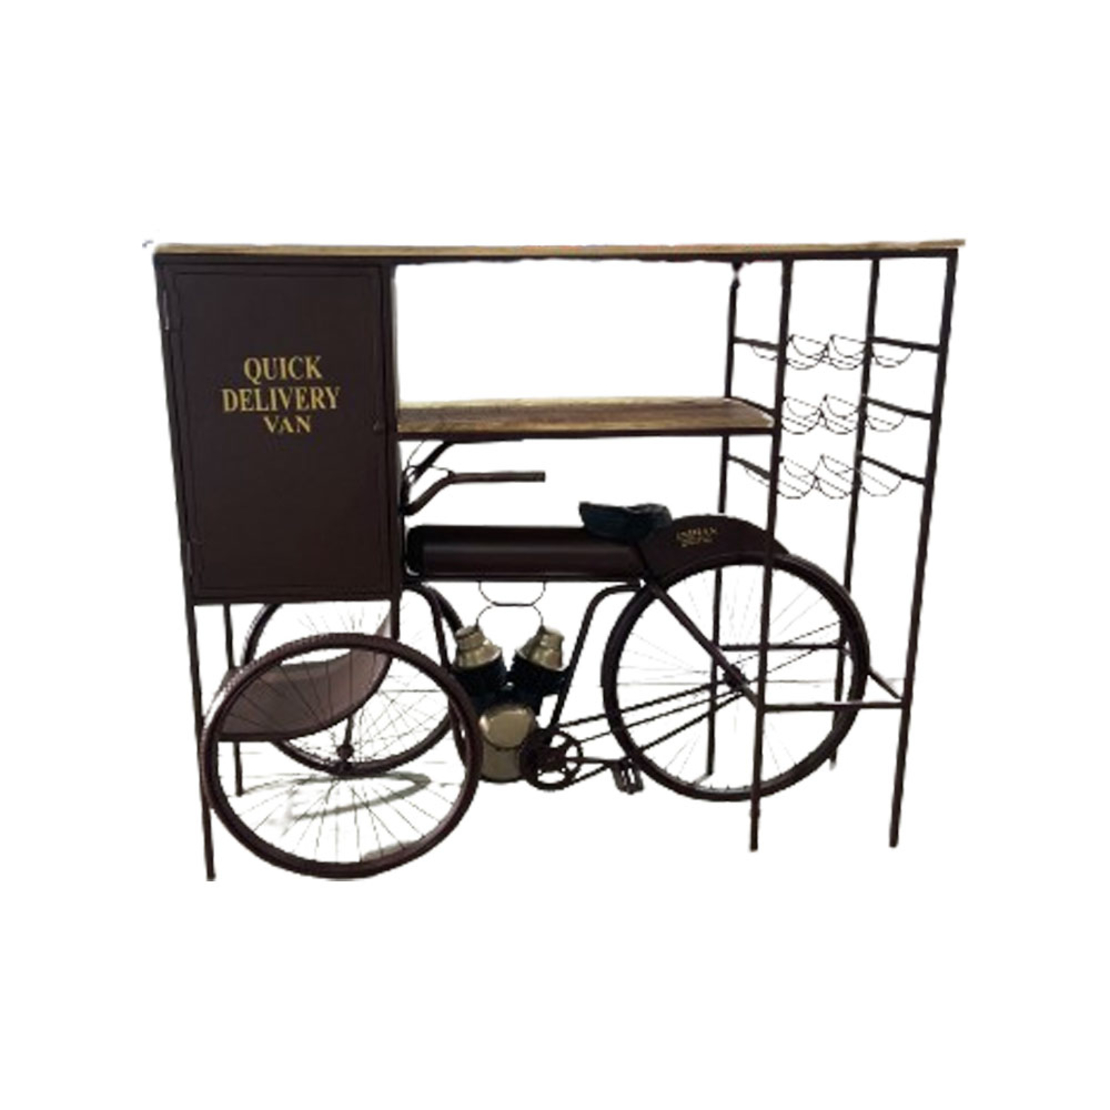 TRICYCLE CONSOLE BAR METAL BORDEAUX NATURAL 178x53xH145cm IN